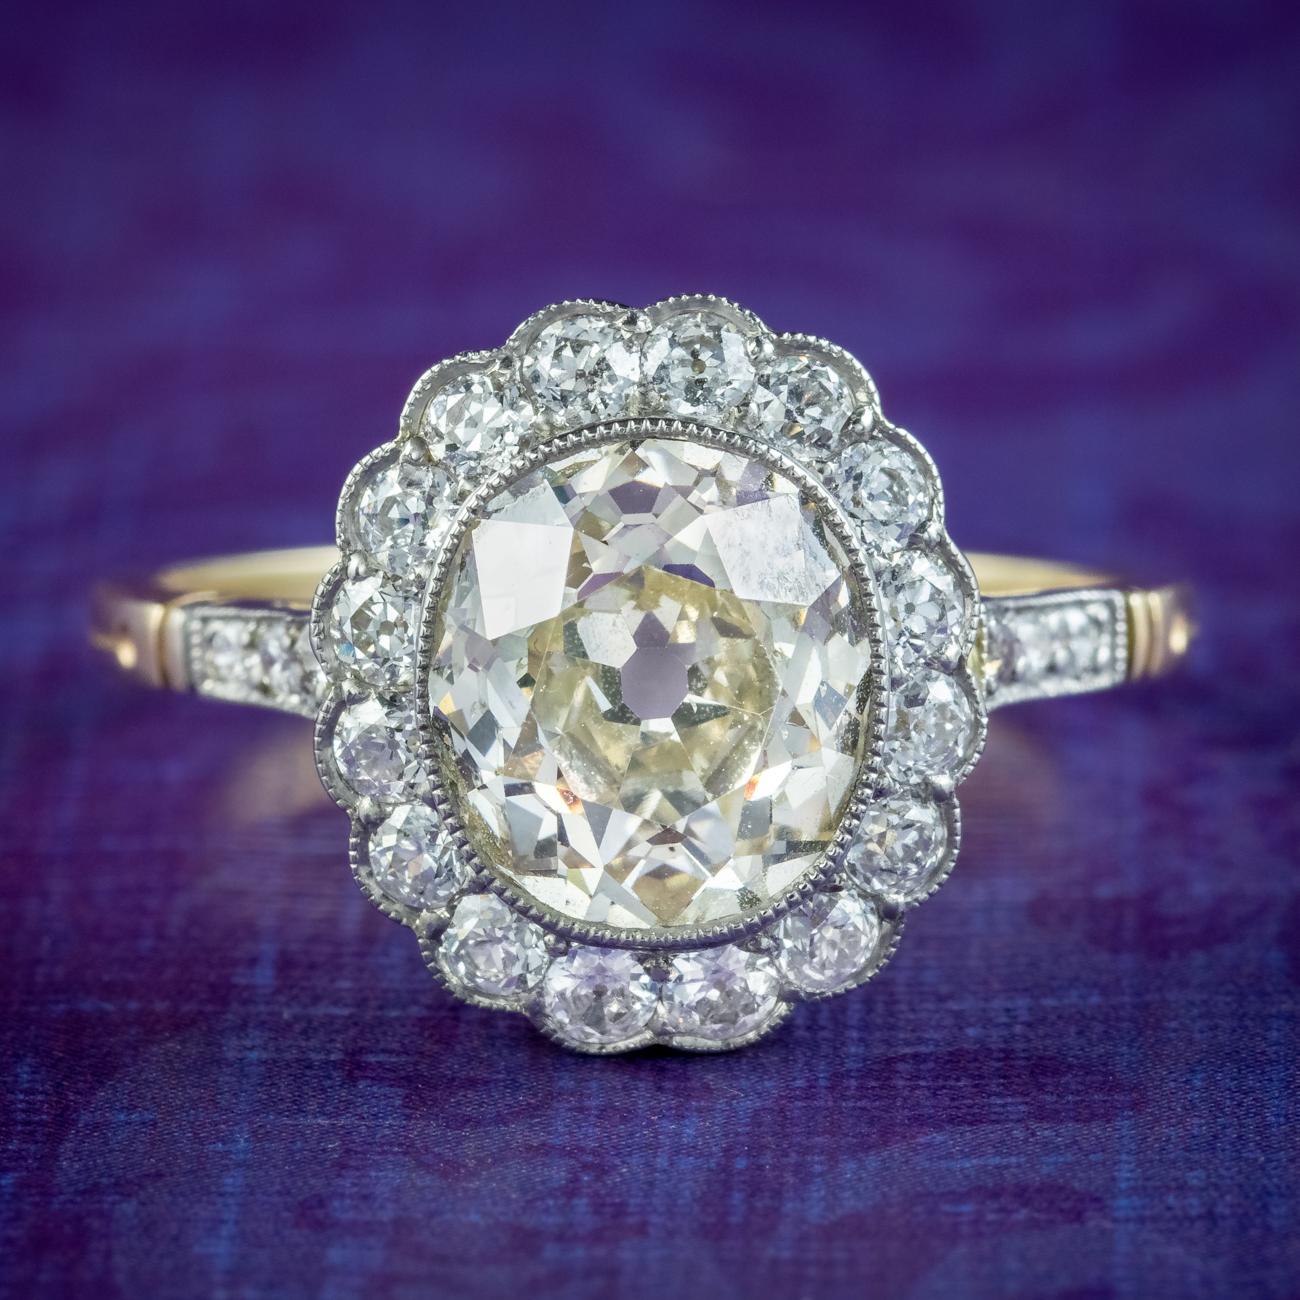 A stunning antique Edwardian daisy cluster ring crowned with a magnificent oval old cut fancy diamond in the centre, haloed by smaller old cut petals around the border and down each shoulder.  

The centre stone has a subtle champagne hue and